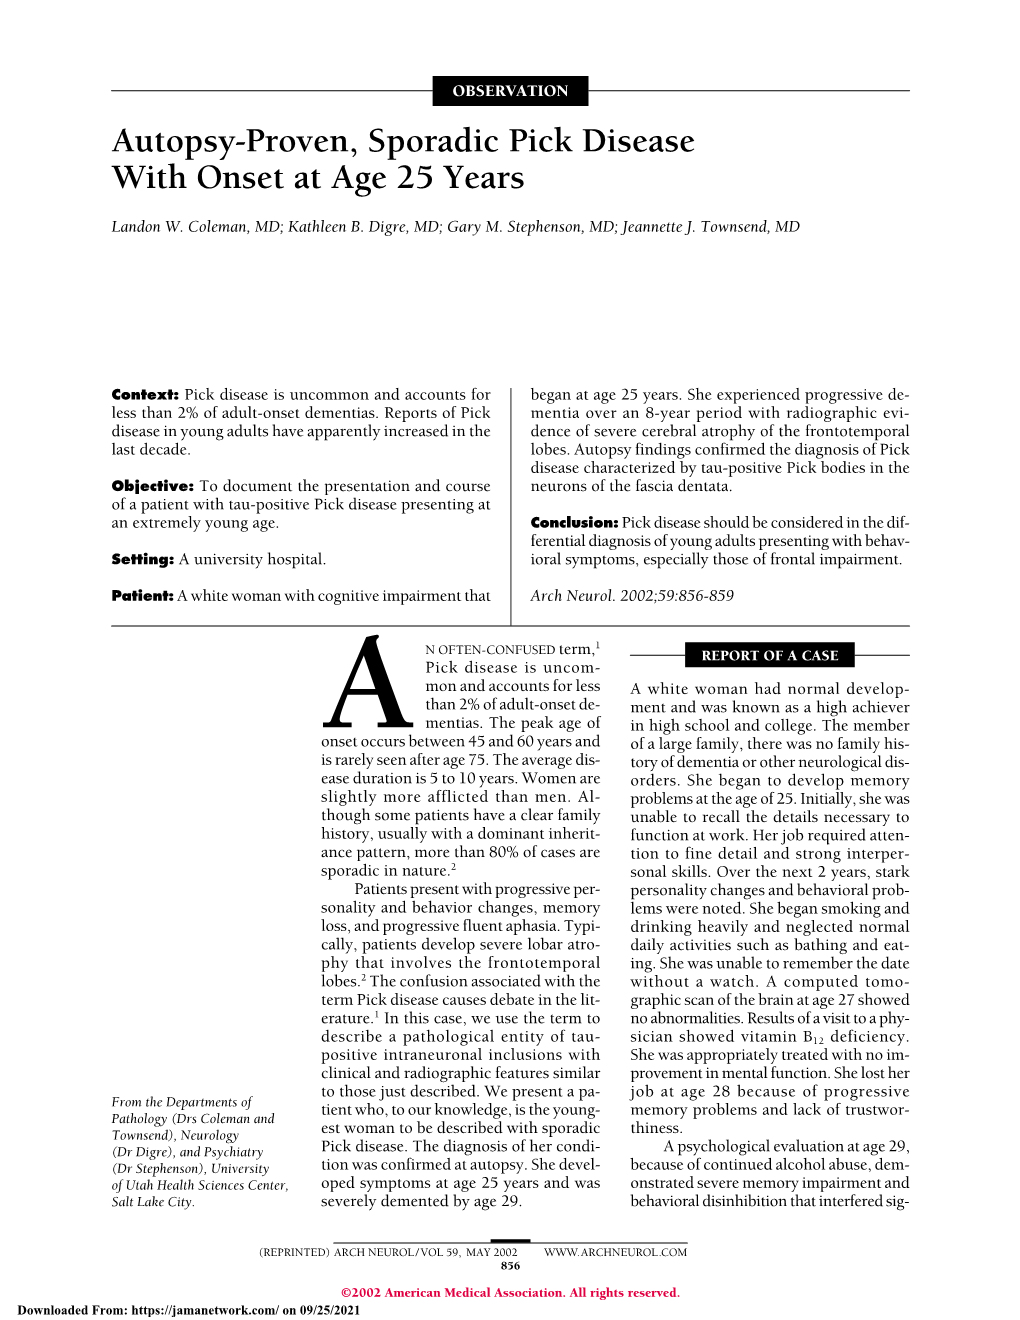 Autopsy-Proven, Sporadic Pick Disease with Onset at Age 25 Years